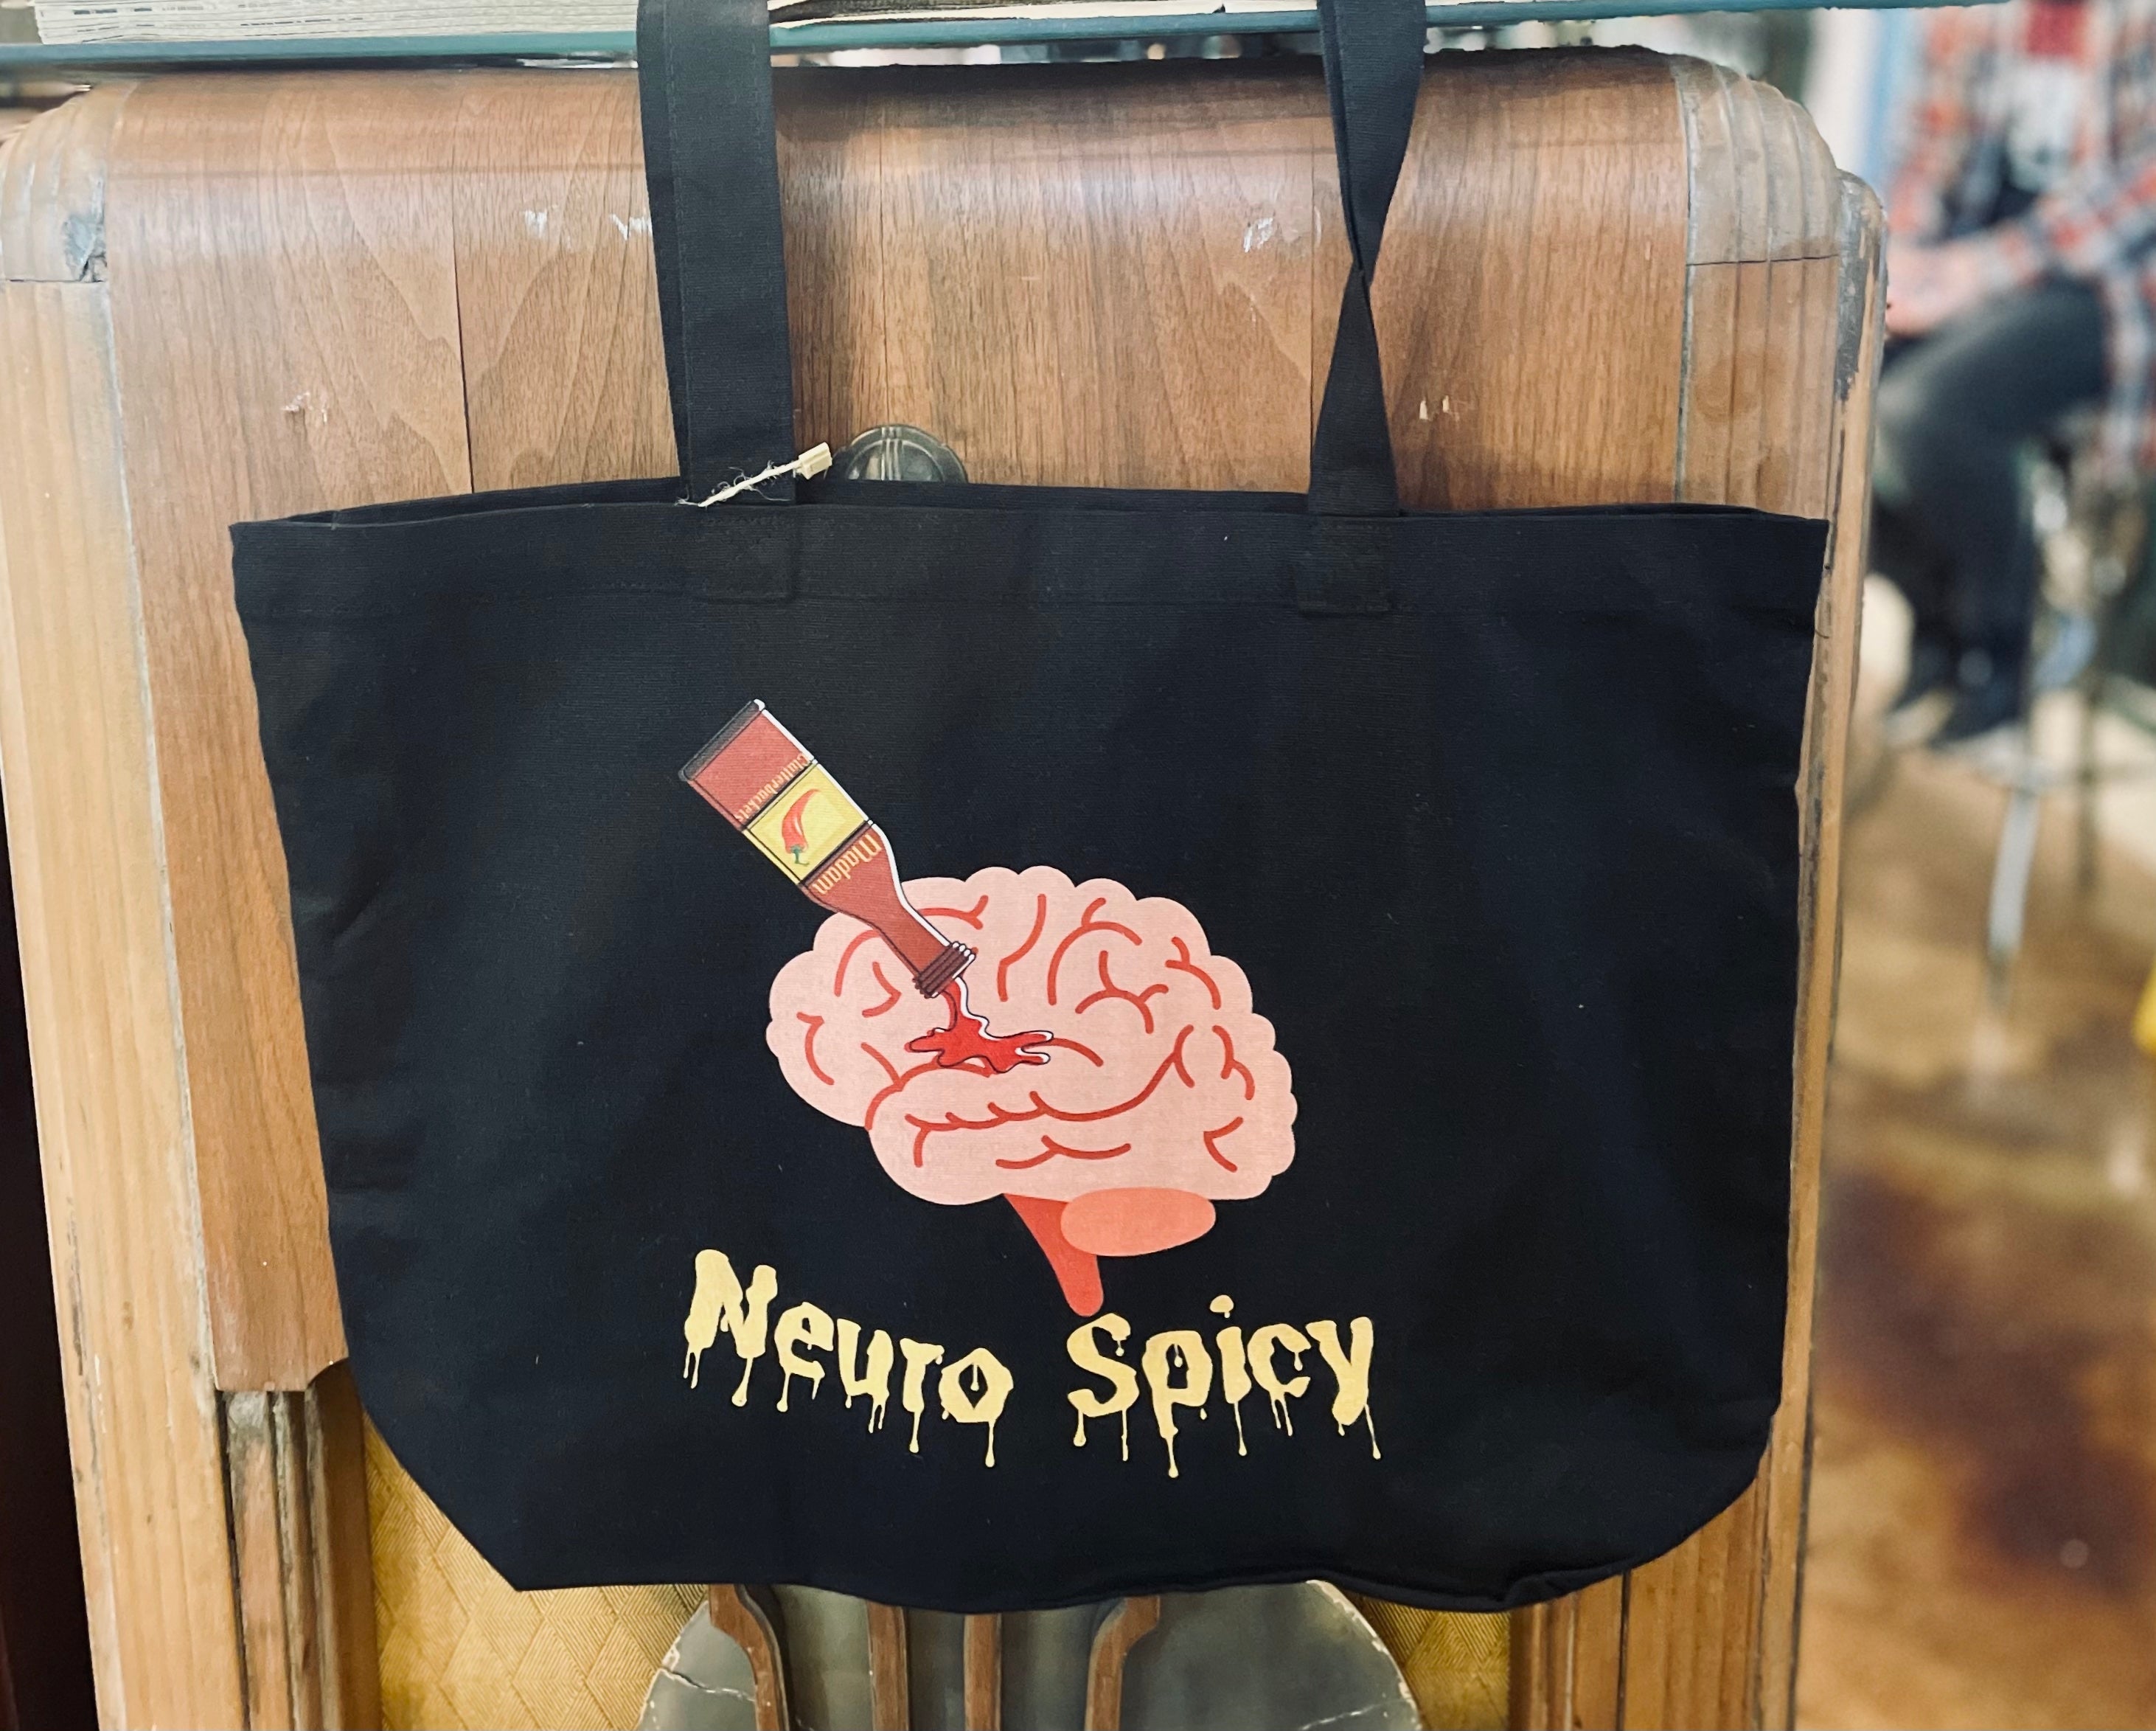 Neuro Spicy Tote Bags!